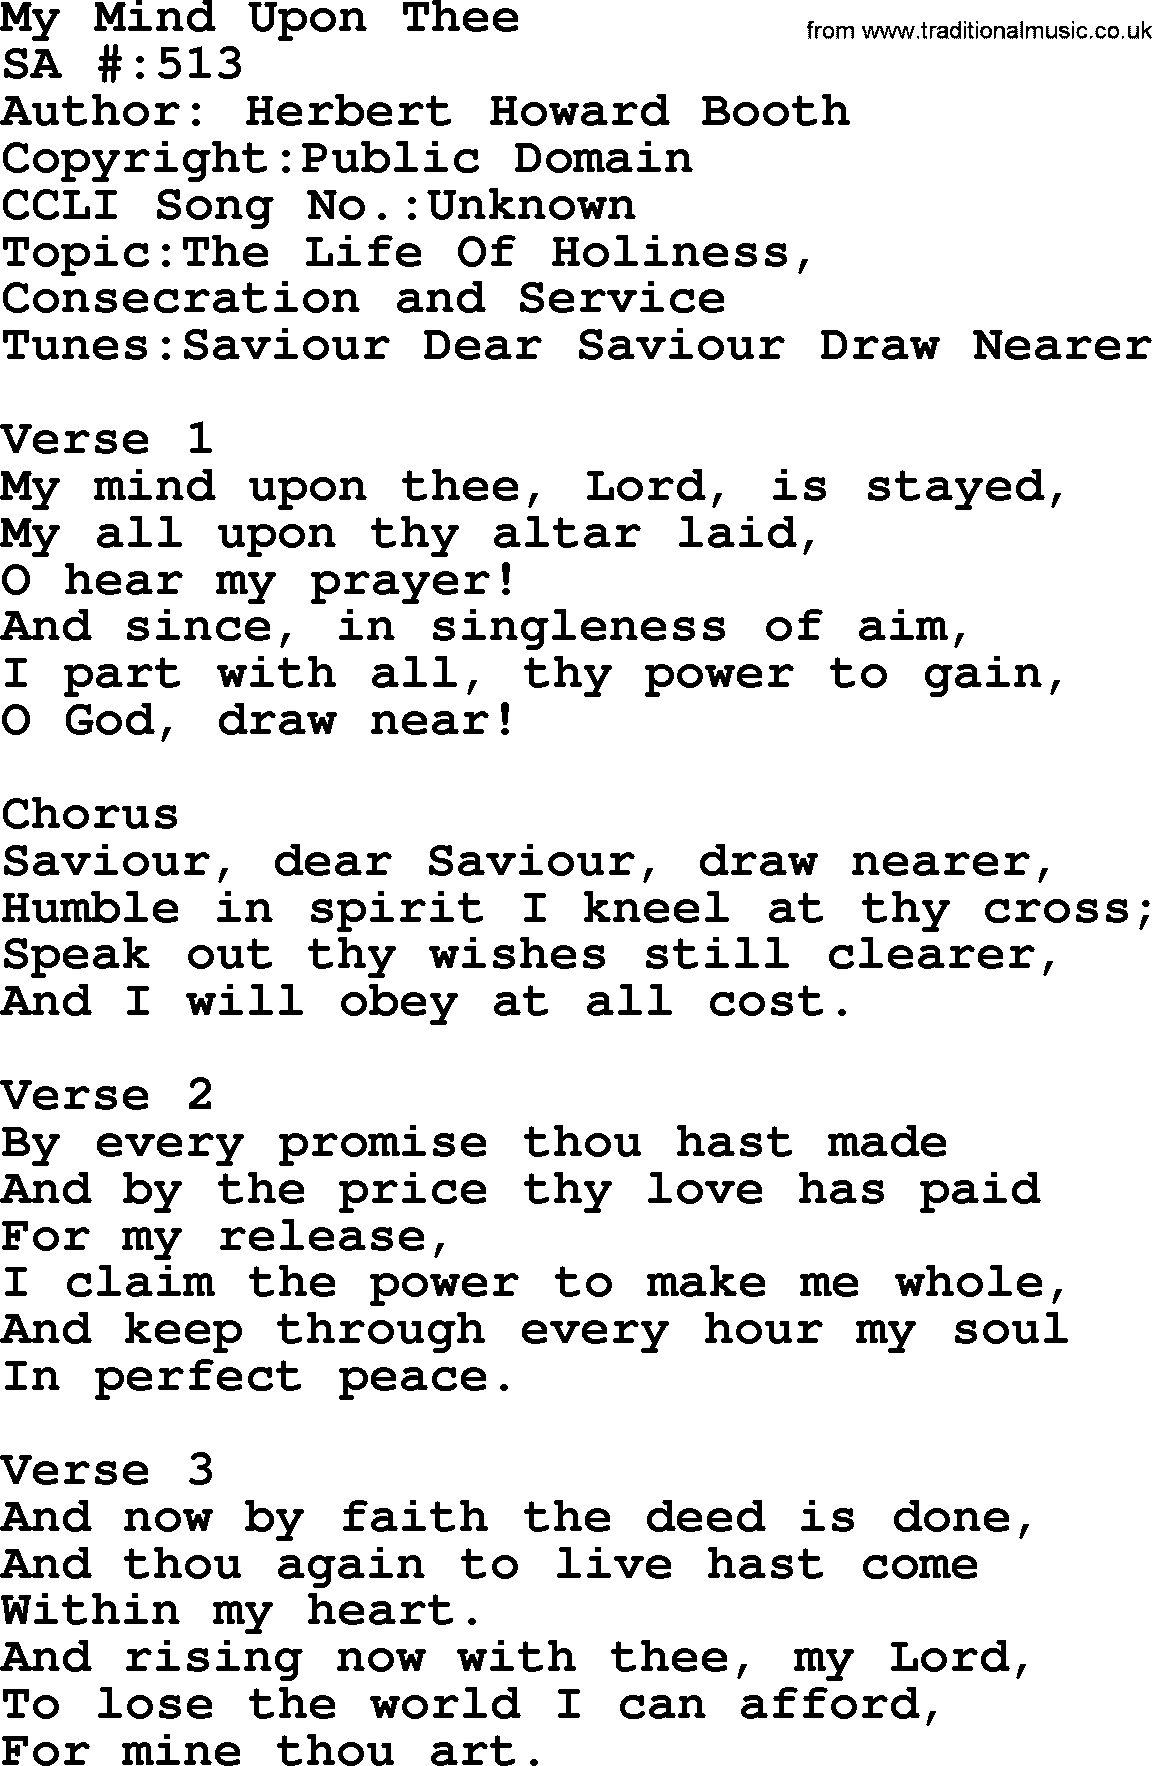 Salvation Army Hymnal, title: My Mind Upon Thee, with lyrics and PDF,